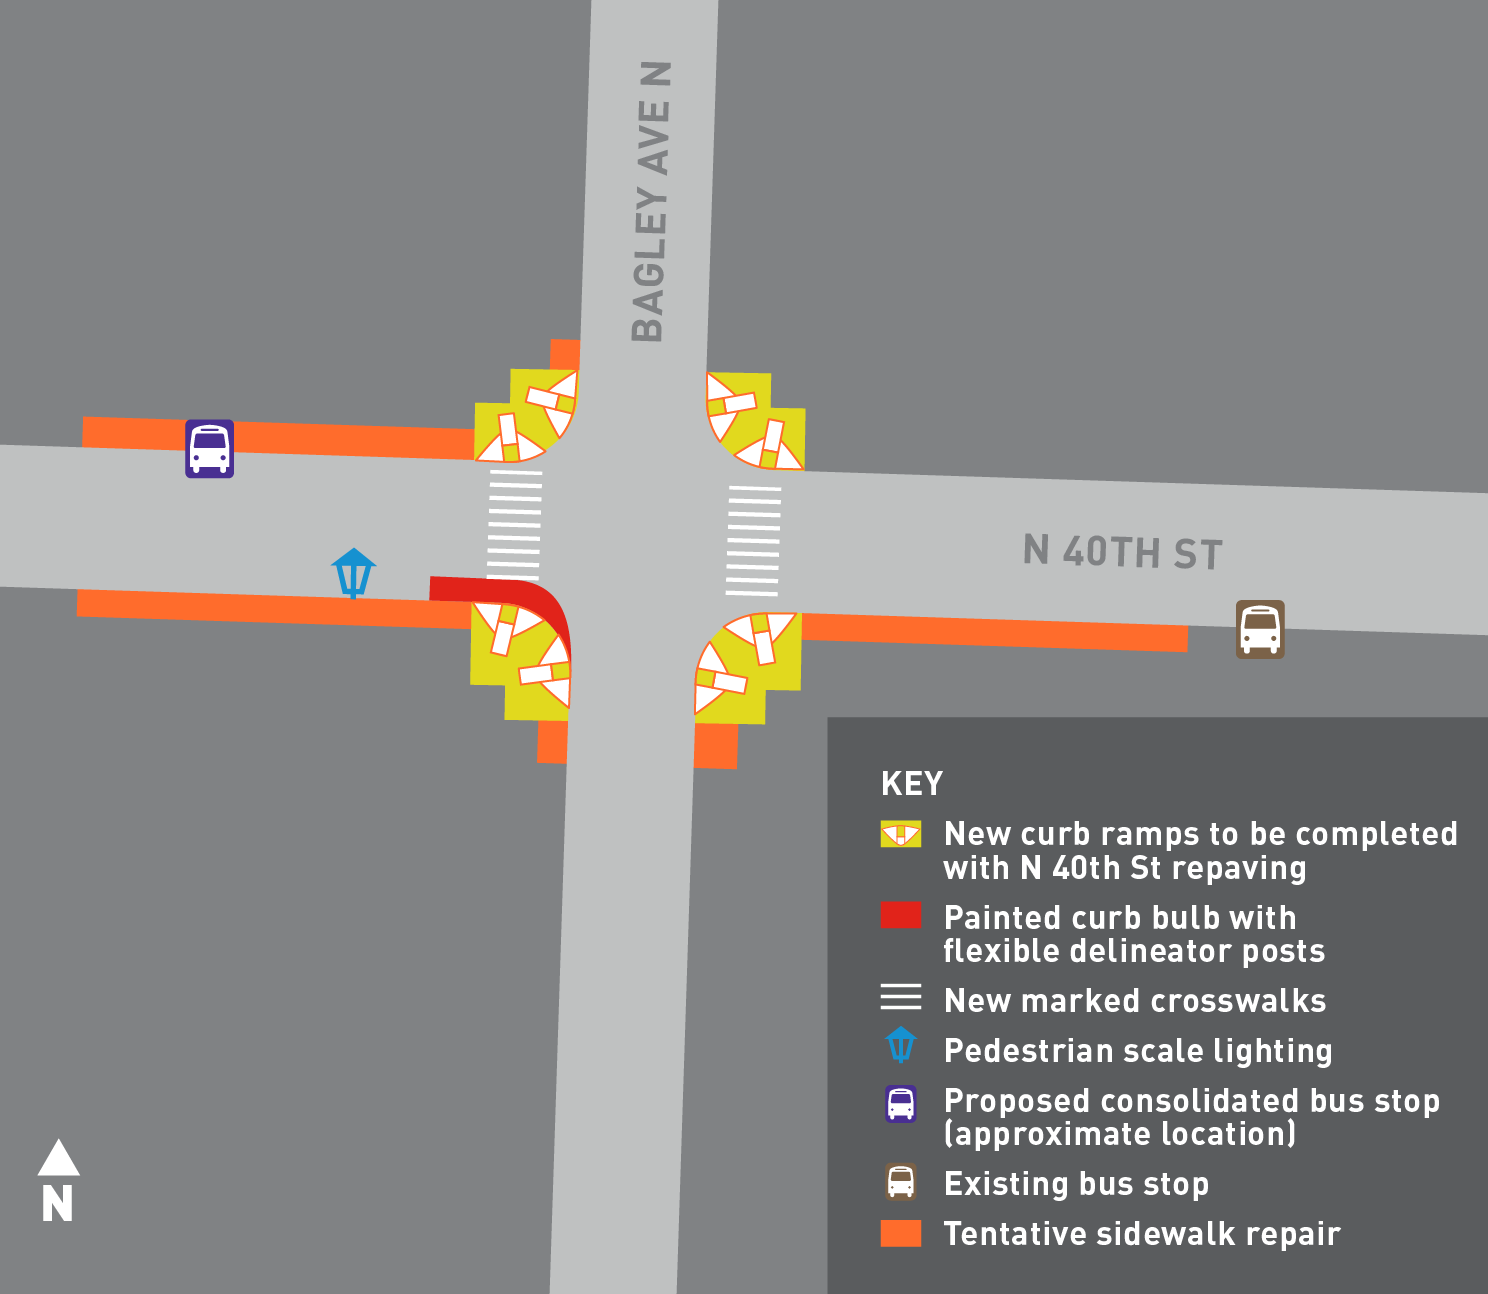 Conceptual design for improvements to the intersection. (City of Seattle)